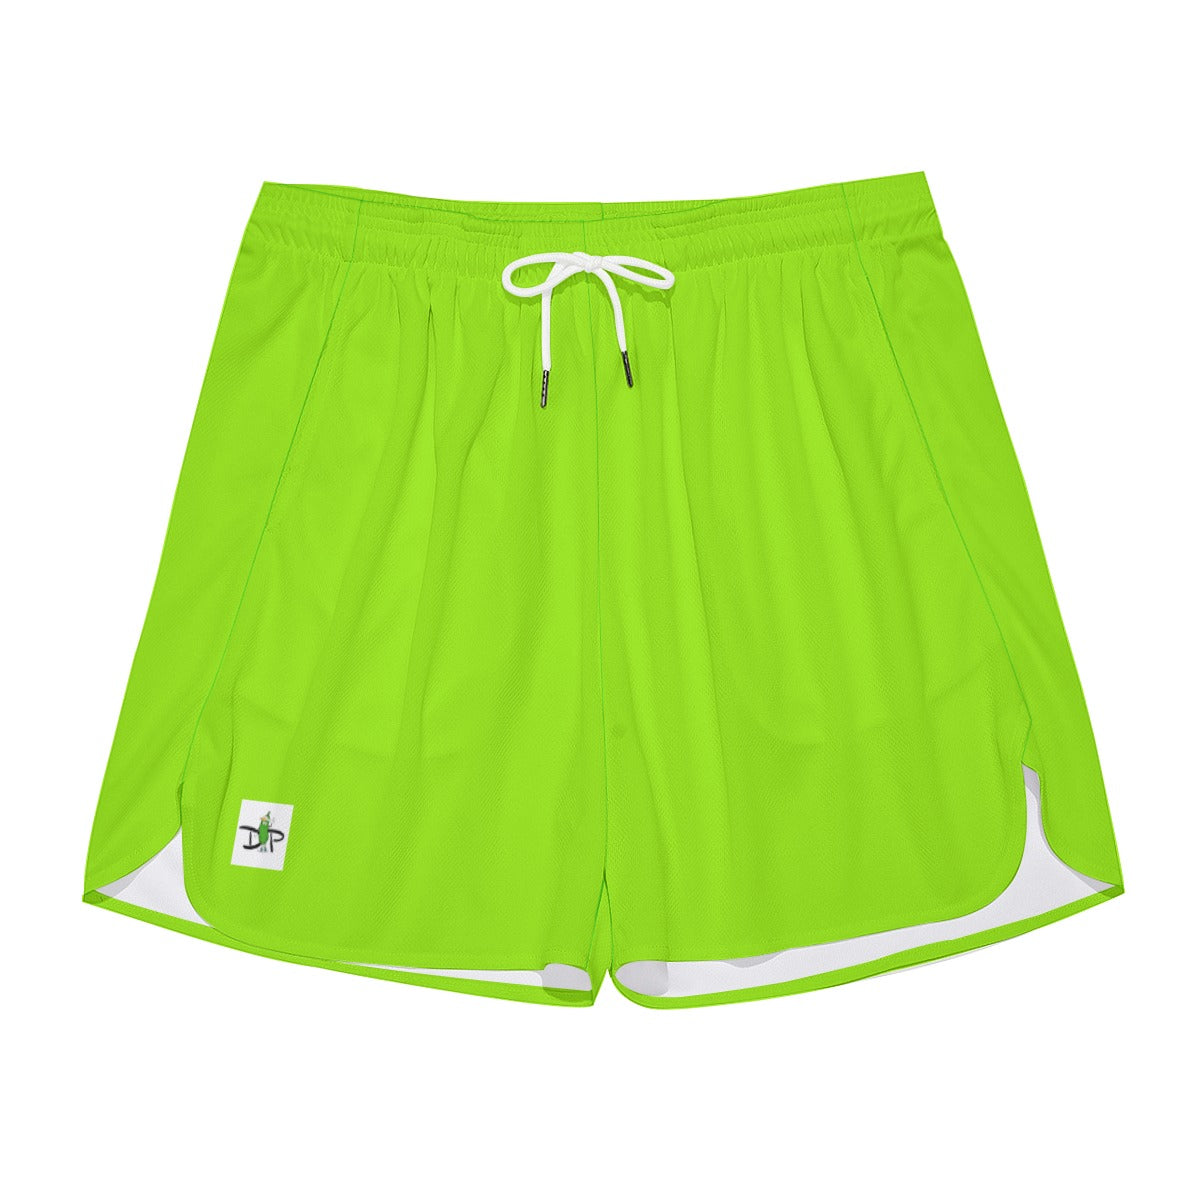 Dizzy Pickle DZY P Classic Men's Pickleball Side Split Court Shorts with Pockets Lime Green